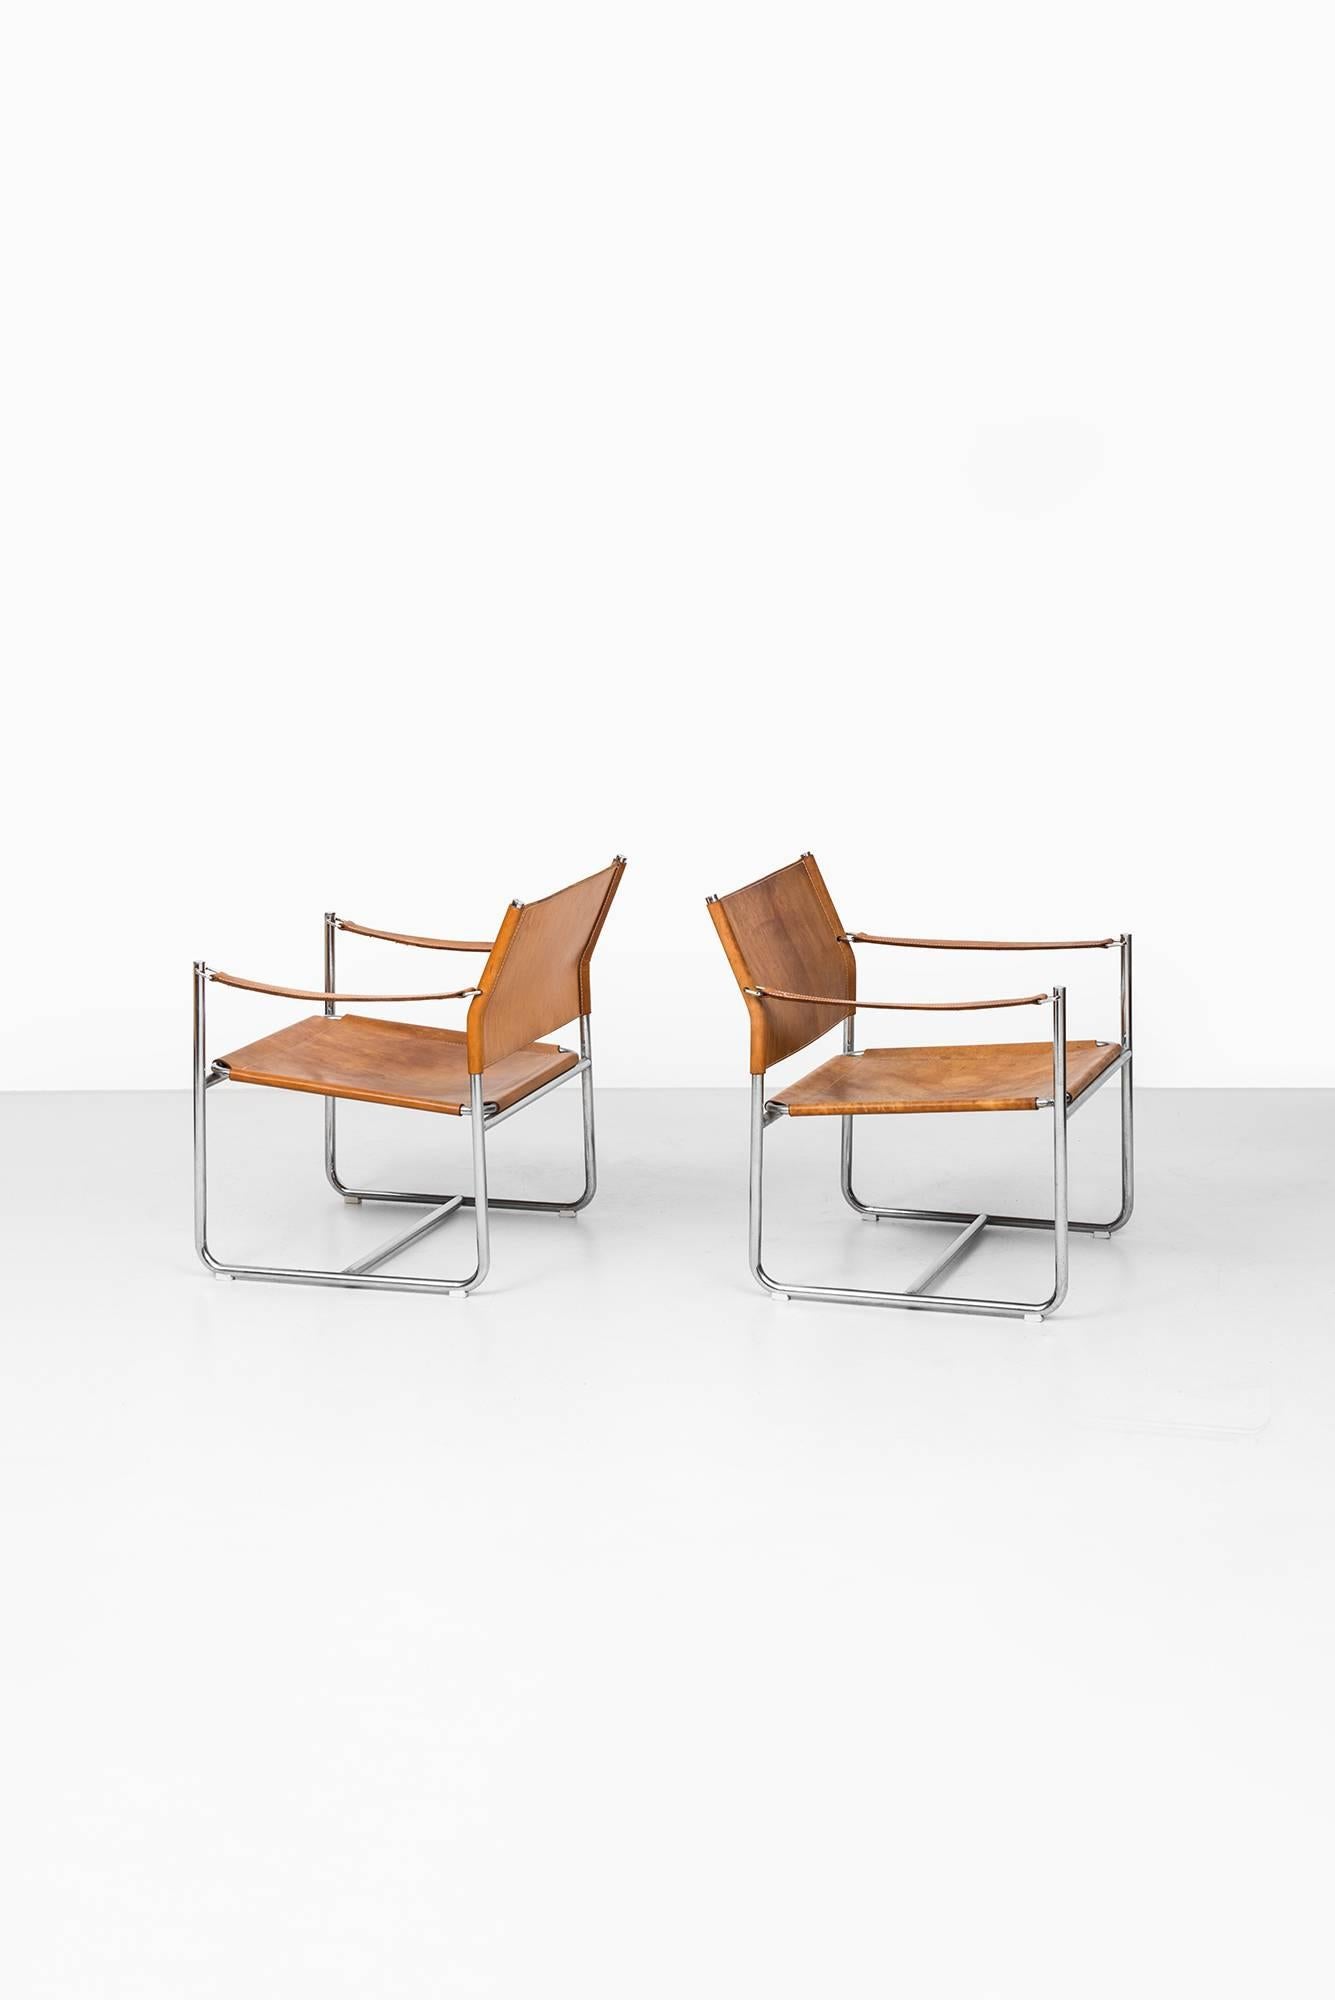 Pair of easy chairs model Amiral designed by Karin Mobring. Produced by Ikea in Sweden.